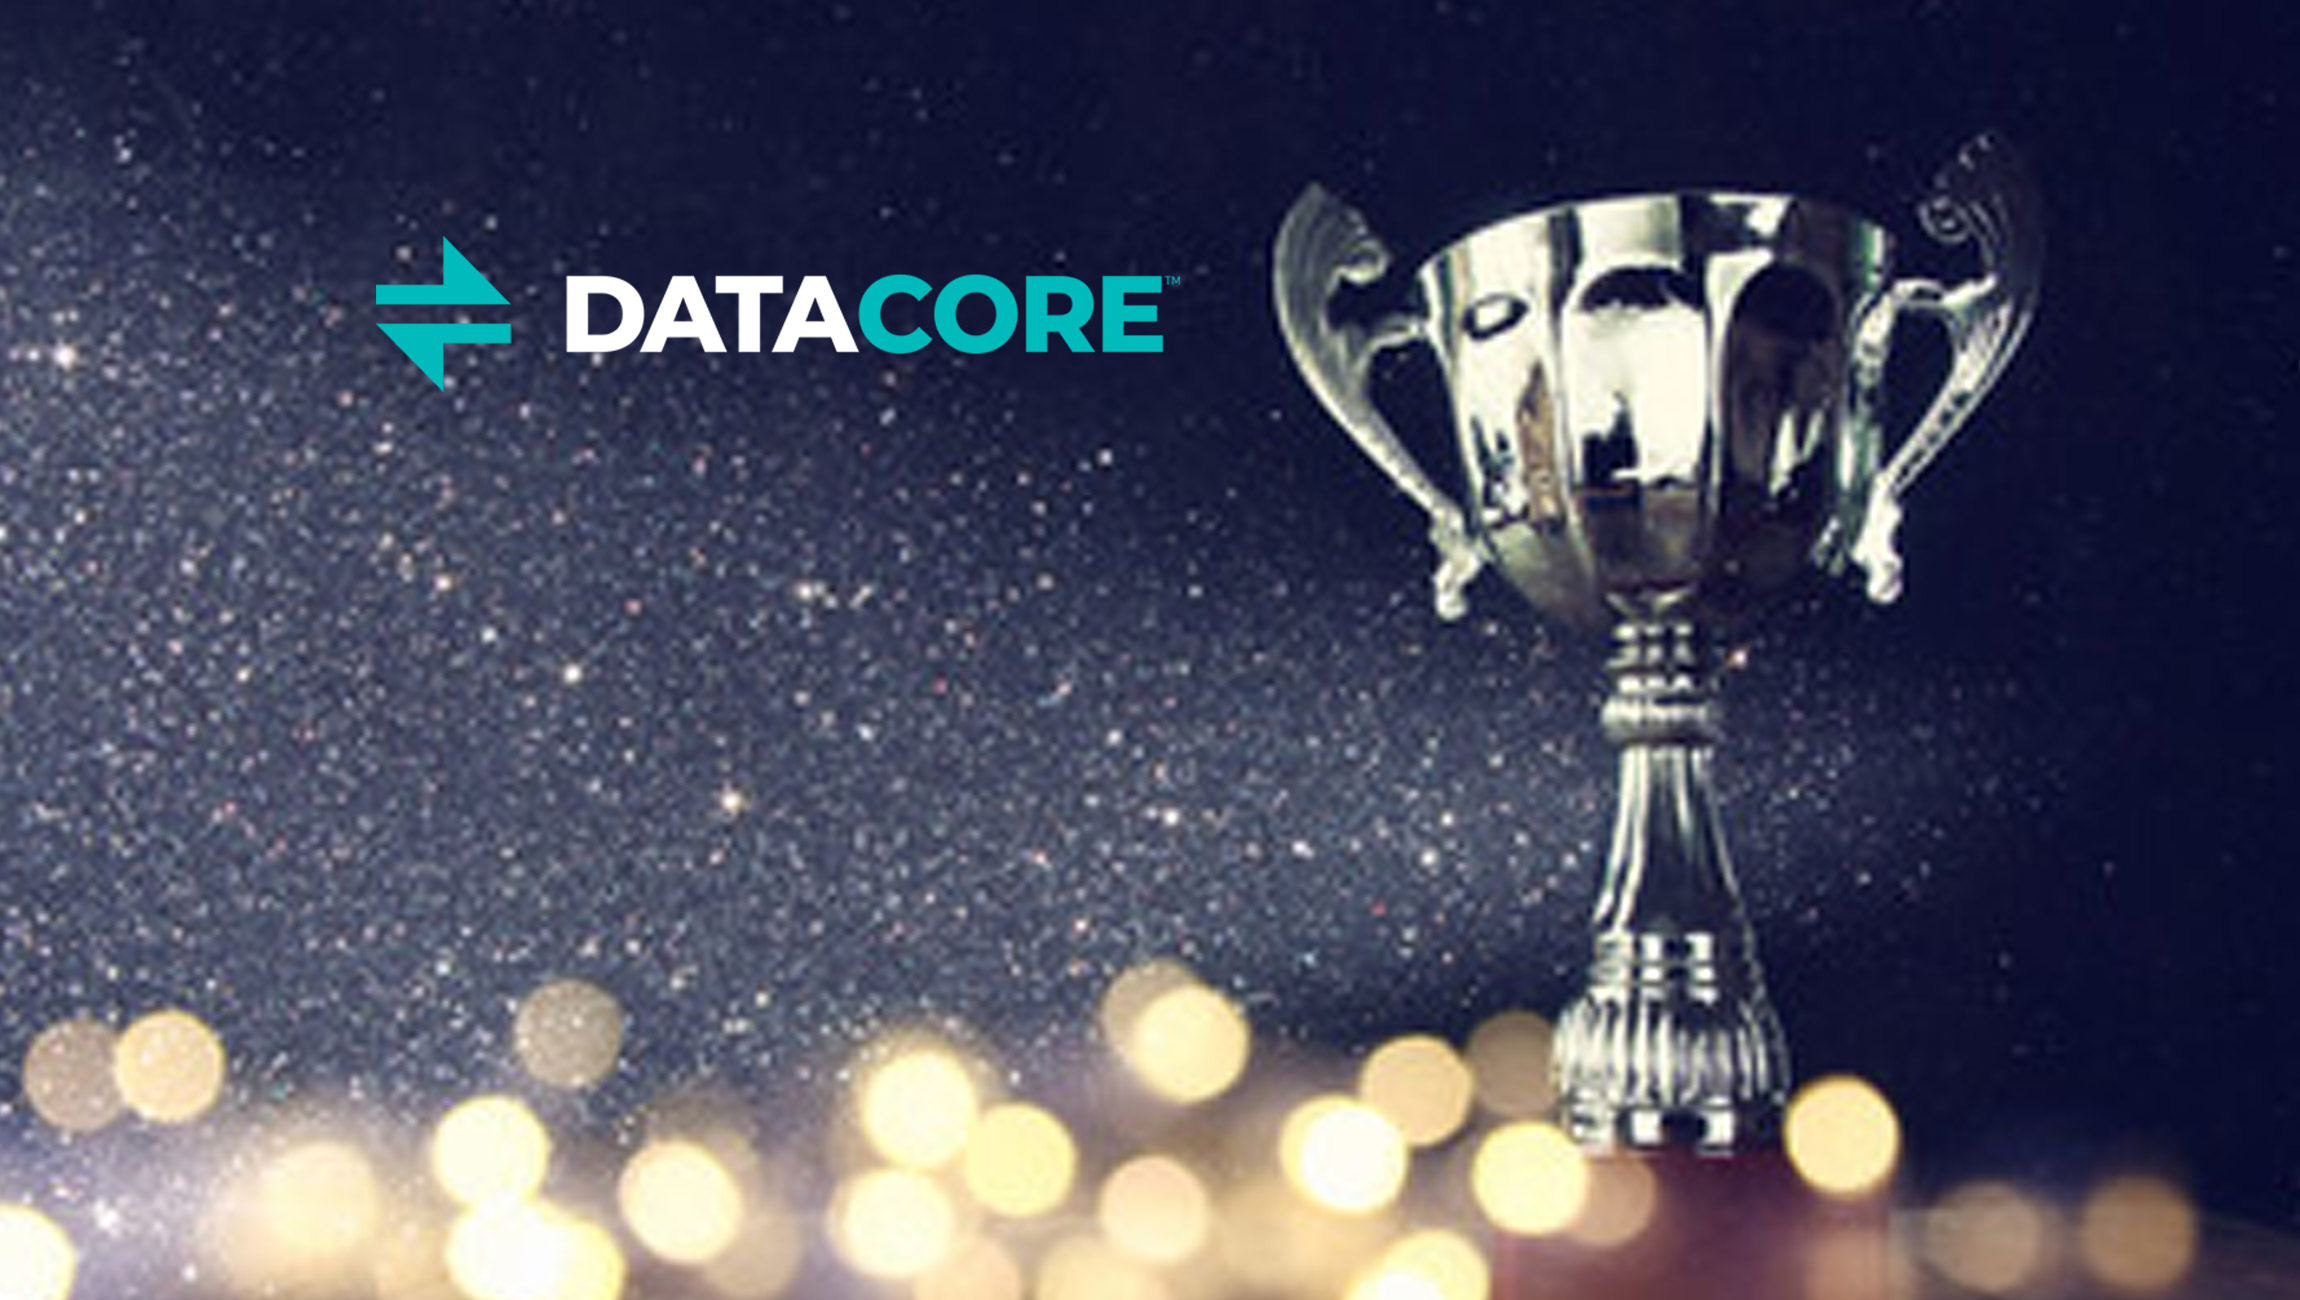 DataCore Wins Silver Stevie Award for Outstanding Sales and Customer Service